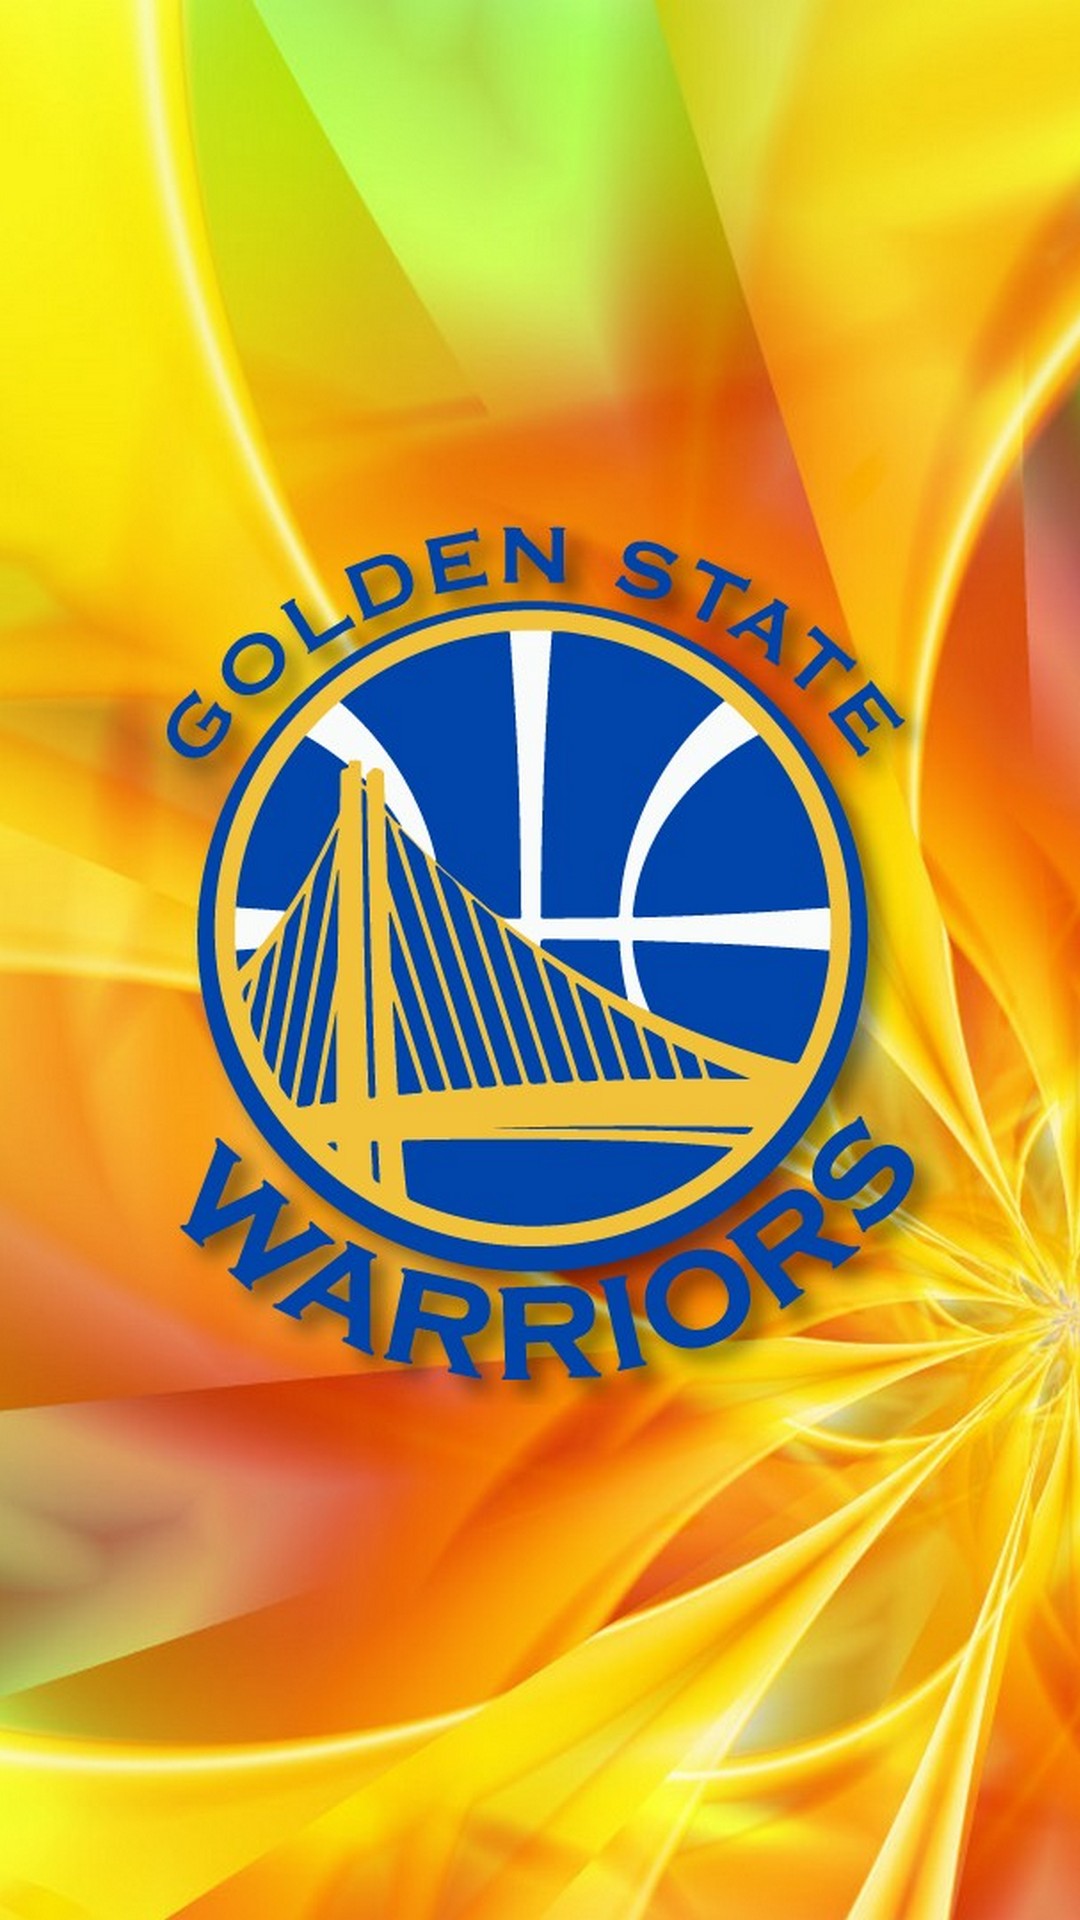 Golden State Warriors Backgrounds For Android with resolution 1080X1920 pixel. You can make this wallpaper for your Android backgrounds, Tablet, Smartphones Screensavers and Mobile Phone Lock Screen